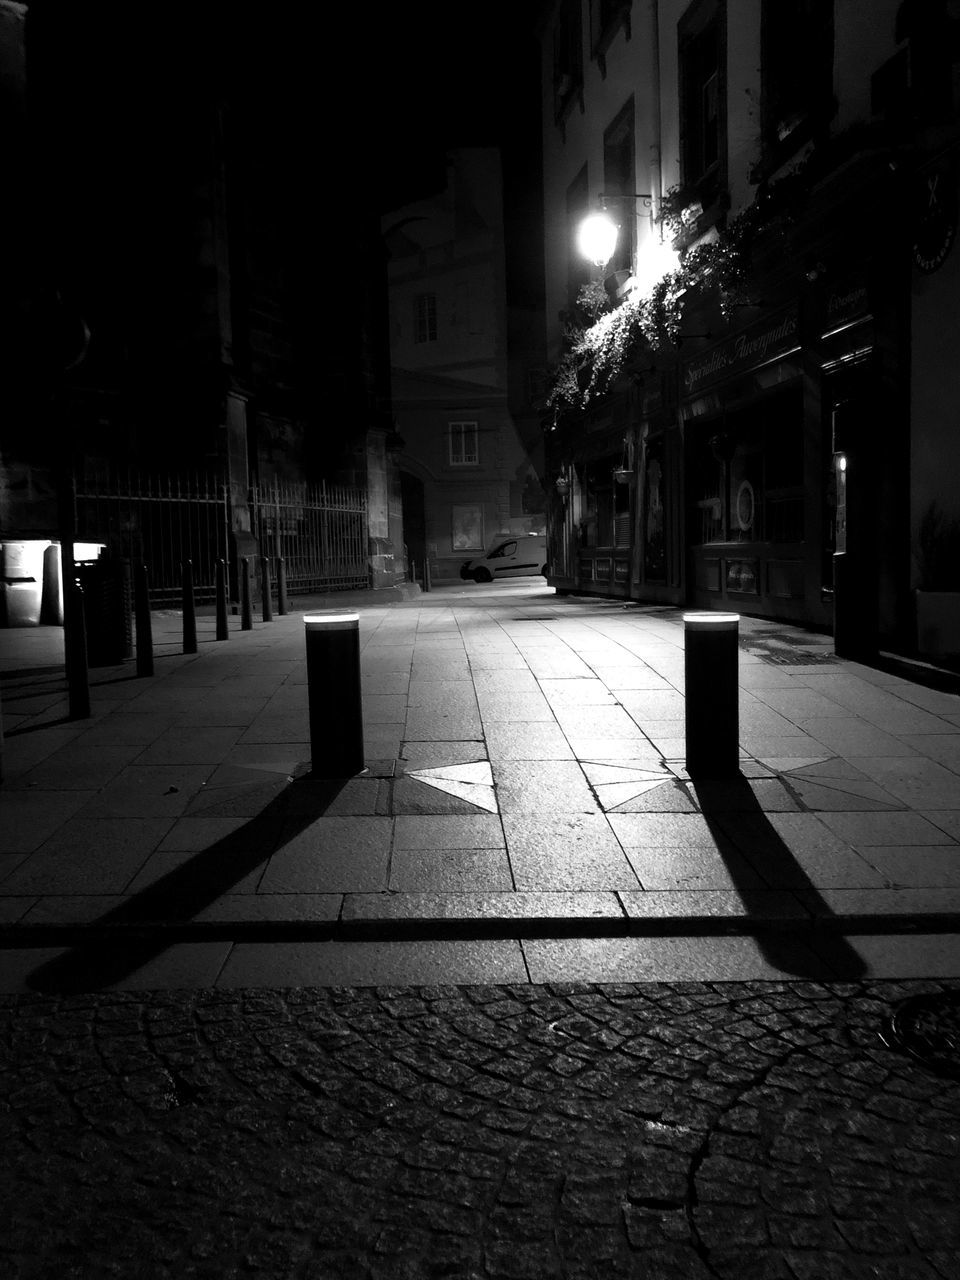 darkness, black, night, architecture, light, building exterior, street, built structure, white, city, illuminated, lighting, road, black and white, monochrome, footpath, street light, no people, monochrome photography, building, sidewalk, nature, transportation, outdoors, shadow, the way forward, city street, lighting equipment, city life, cobblestone